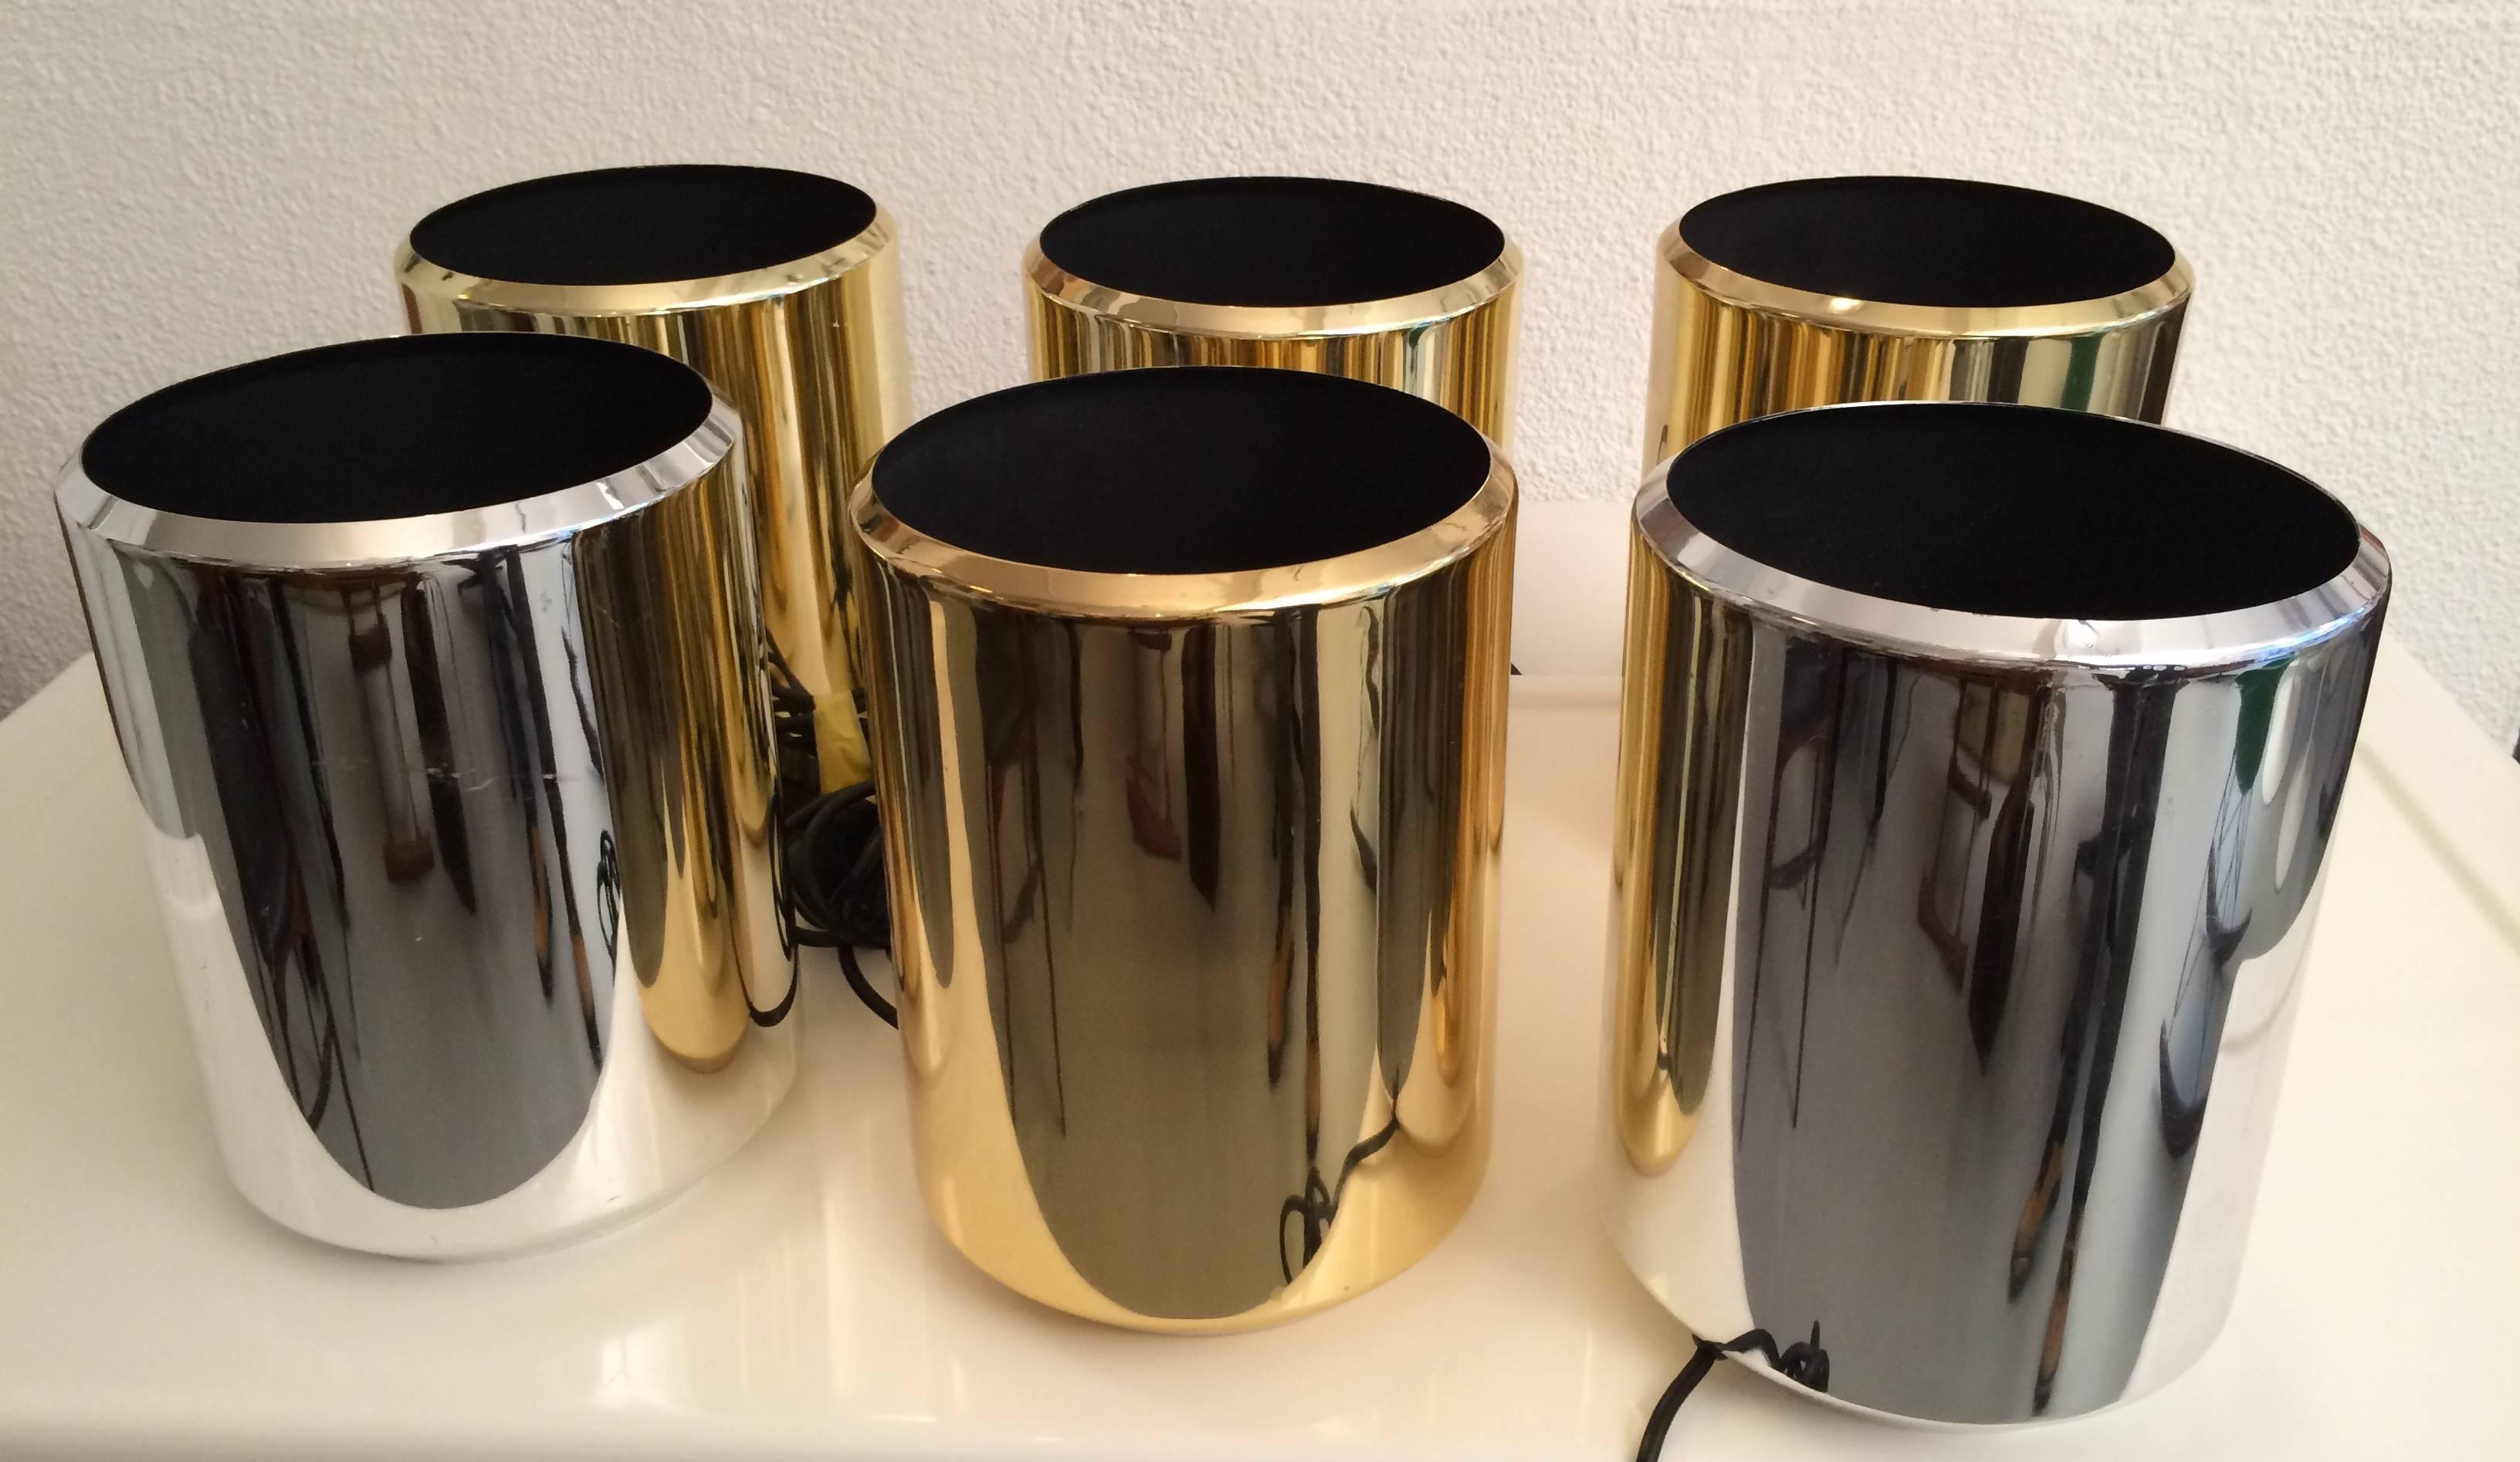 Cylindrical floor lamps made in England by Christopher Lawrence.
Four gold finition / two chrome finition.
Two chrome and two gold with baionnette spot bulb.
Two gold with standard E27 bulb.
Beautiful light effect when placed at the bottom of a